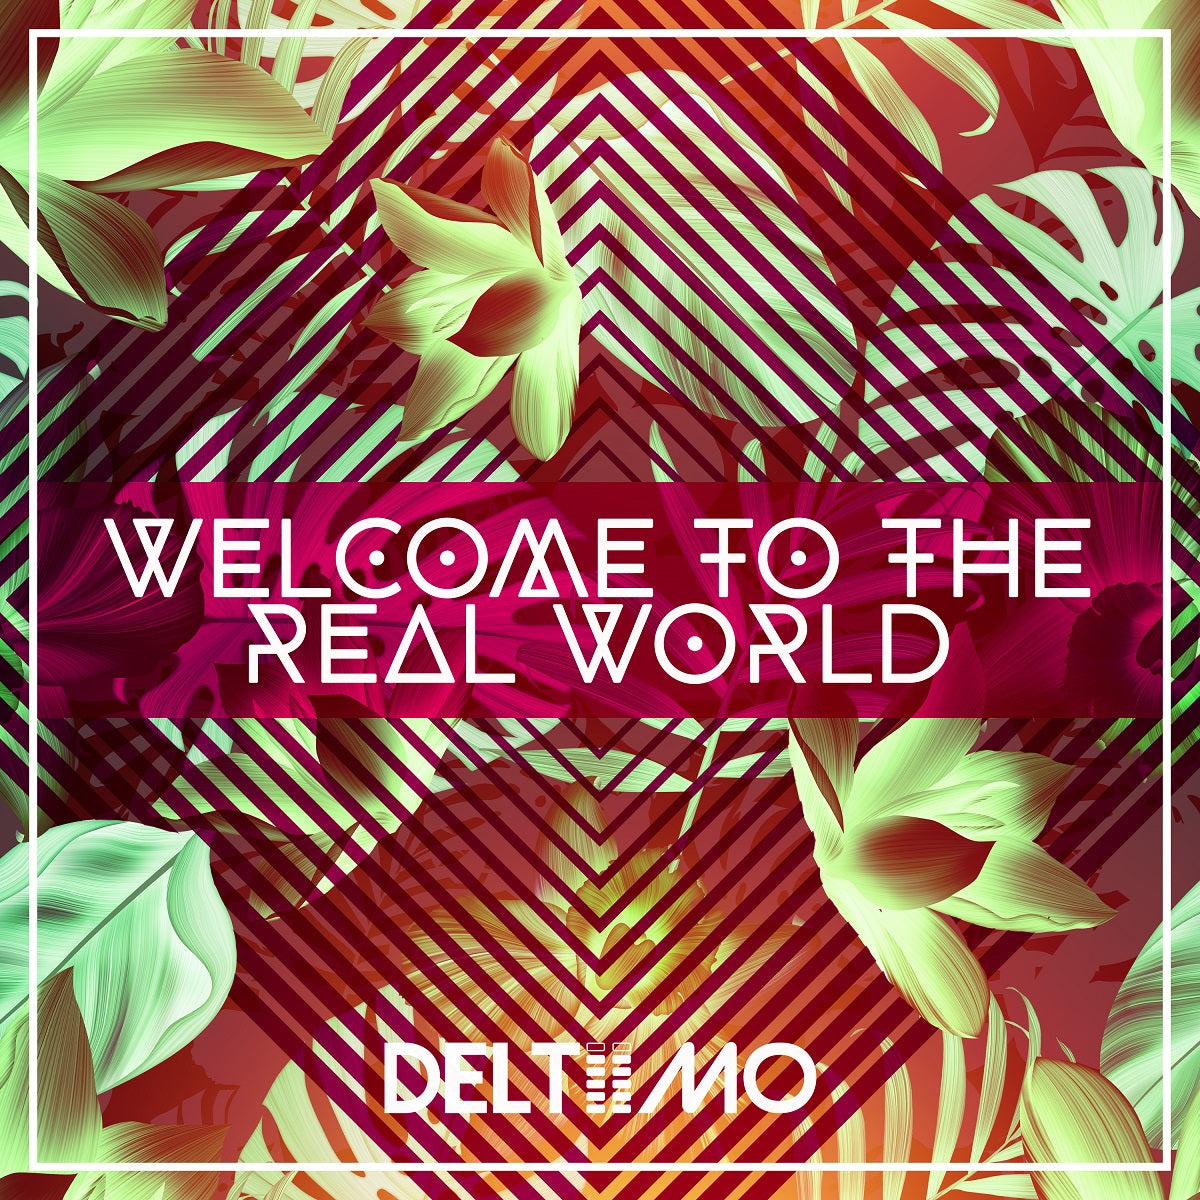 Deltiimo - 'Welcome To The Real World'